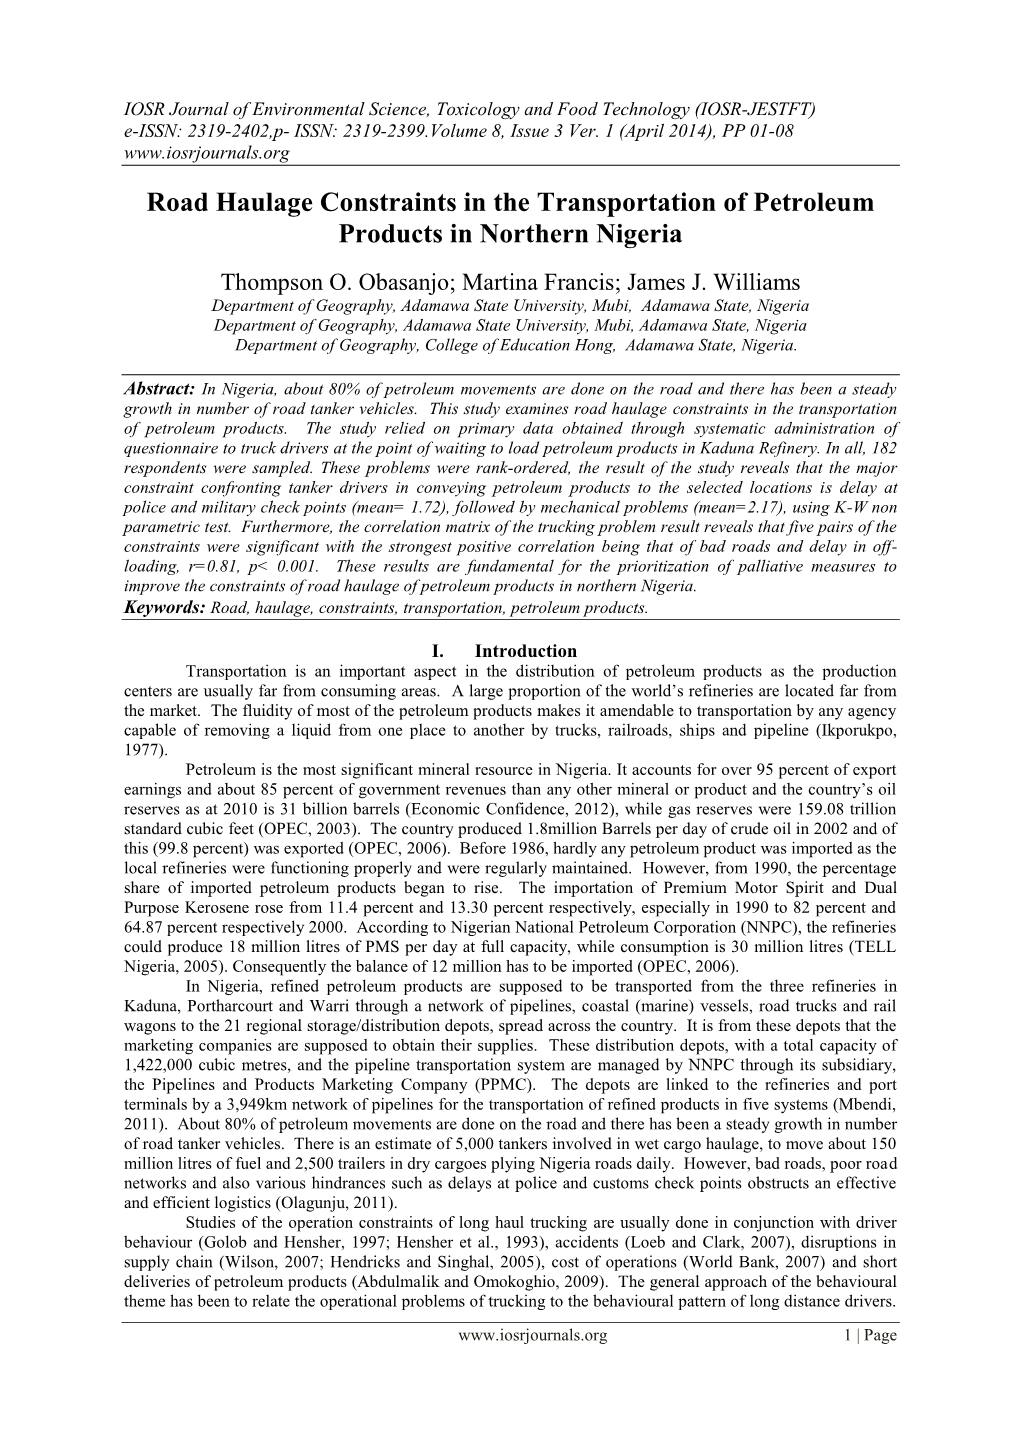 Road Haulage Constraints in the Transportation of Petroleum Products in Northern Nigeria